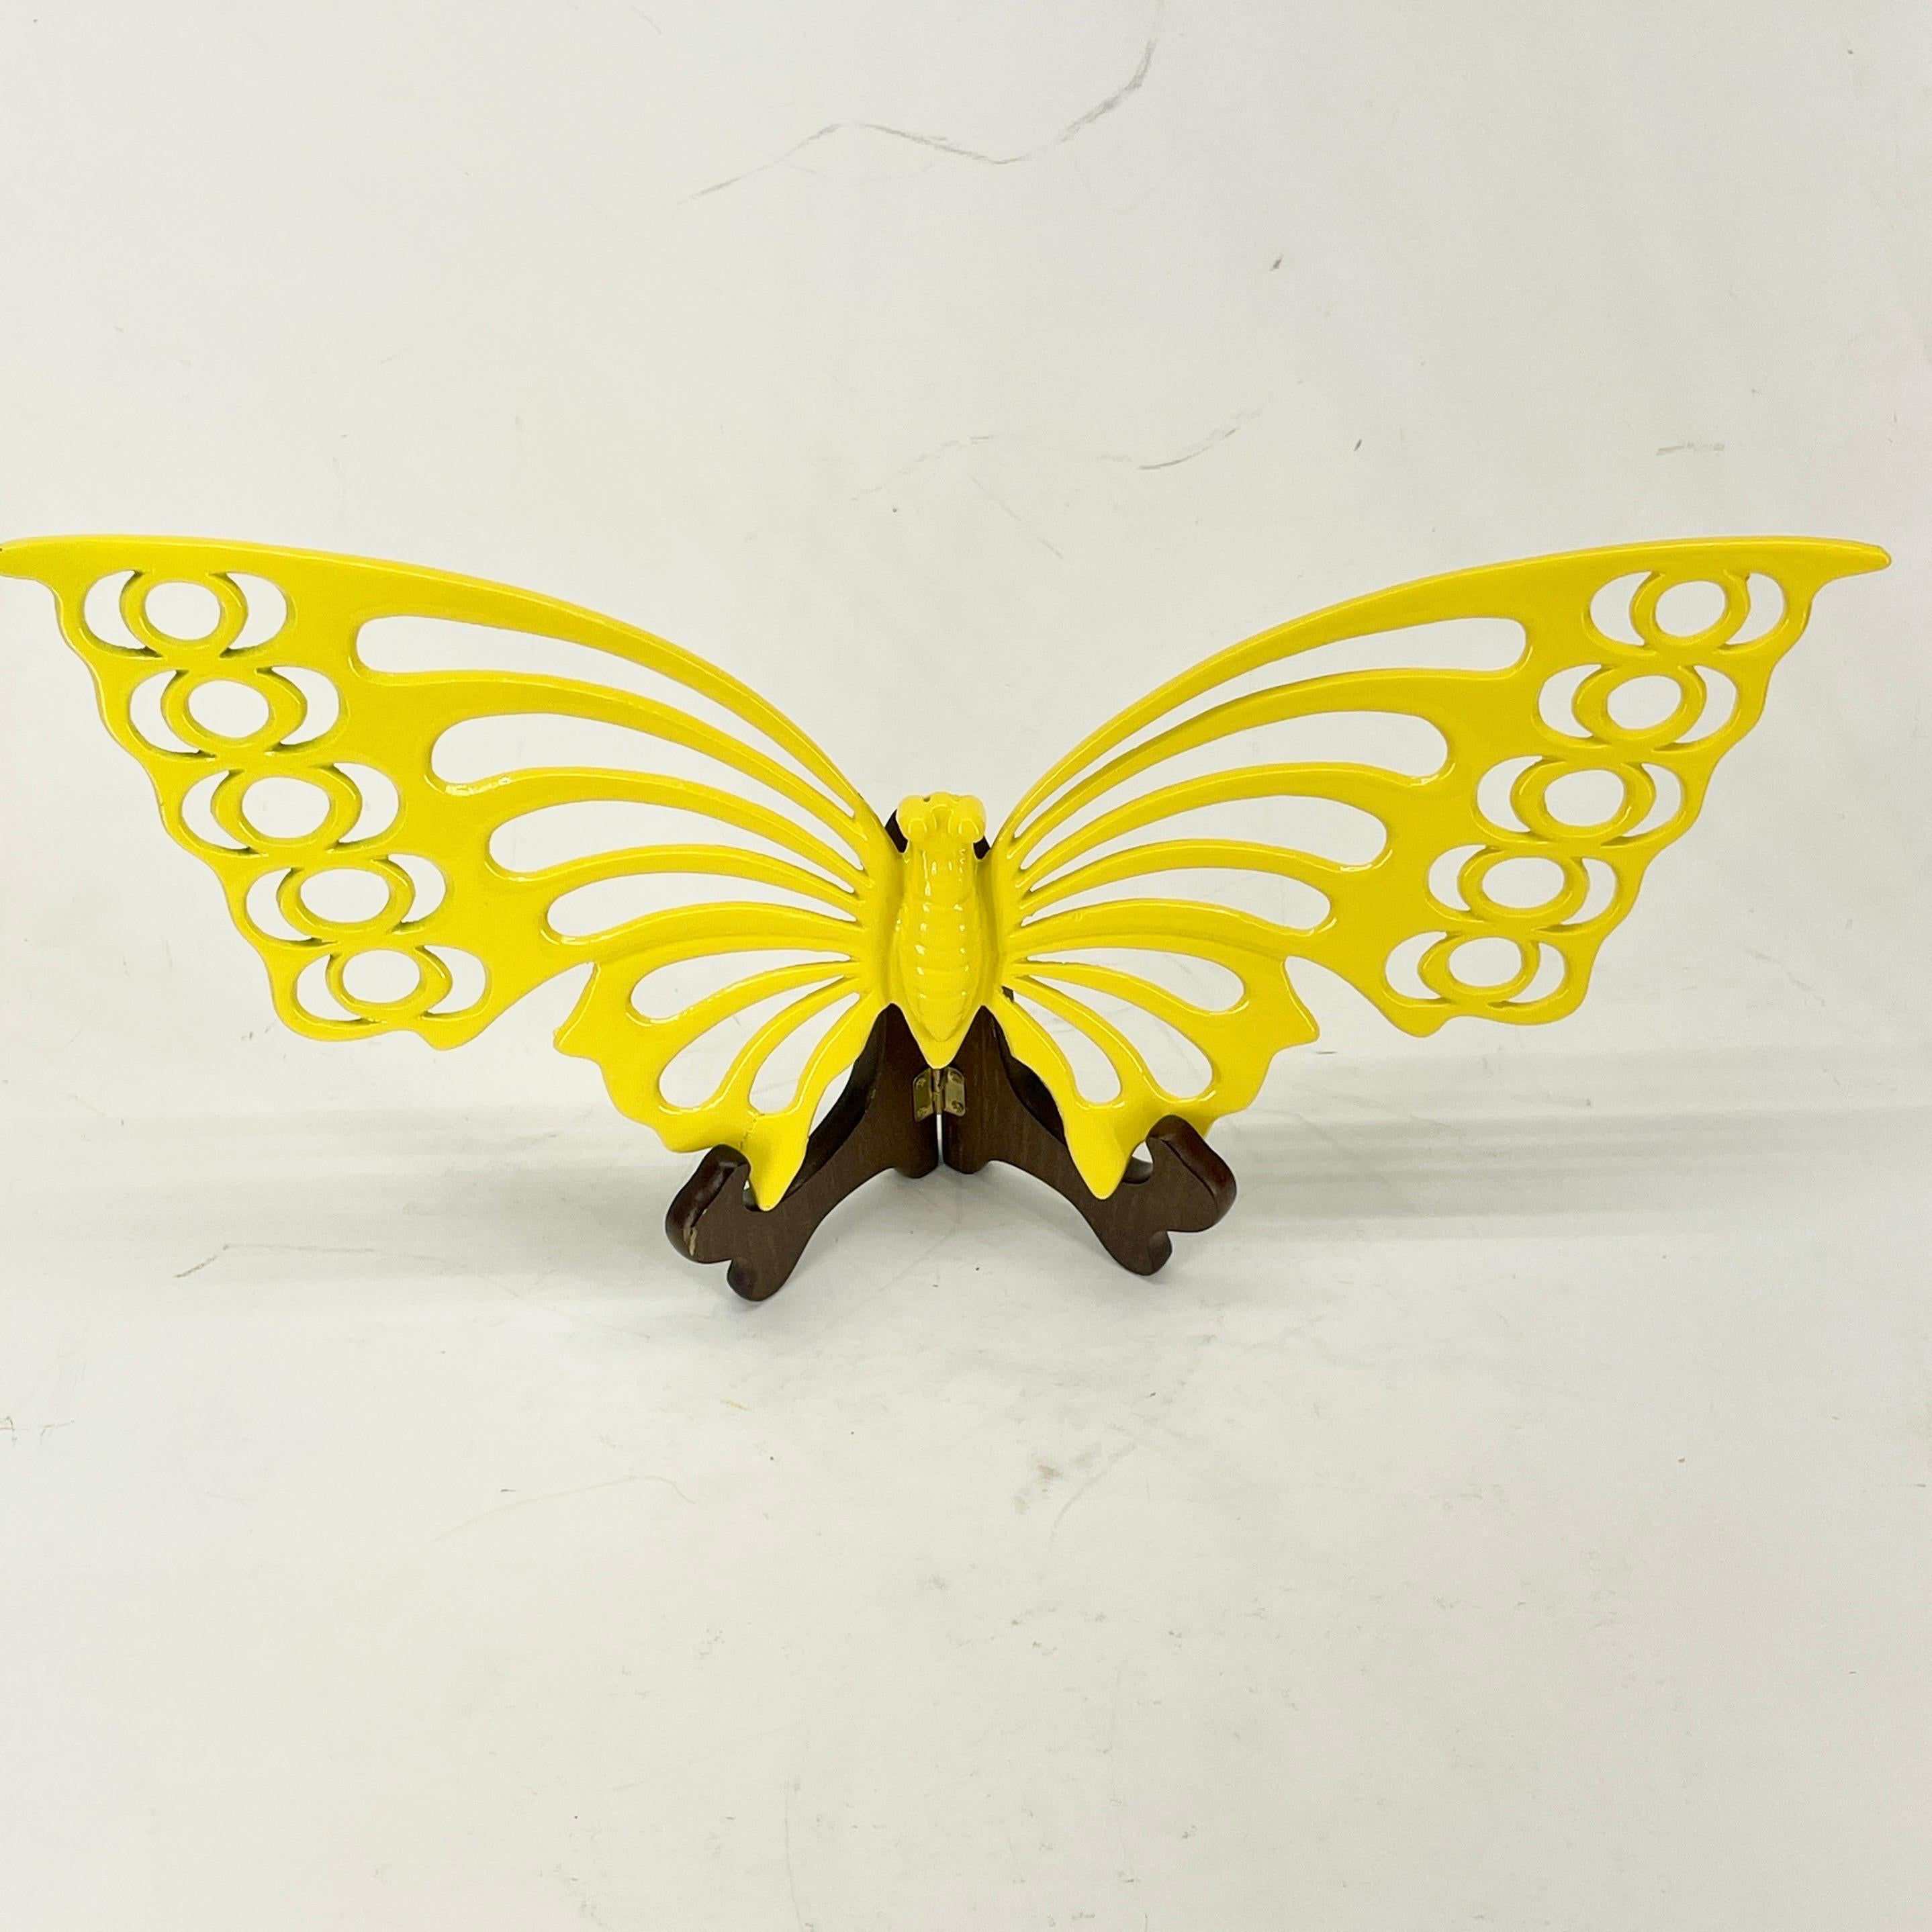 Large Brass Midcentury Butterfly Sculpture in Bright Yellow Powder-Coat For Sale 2